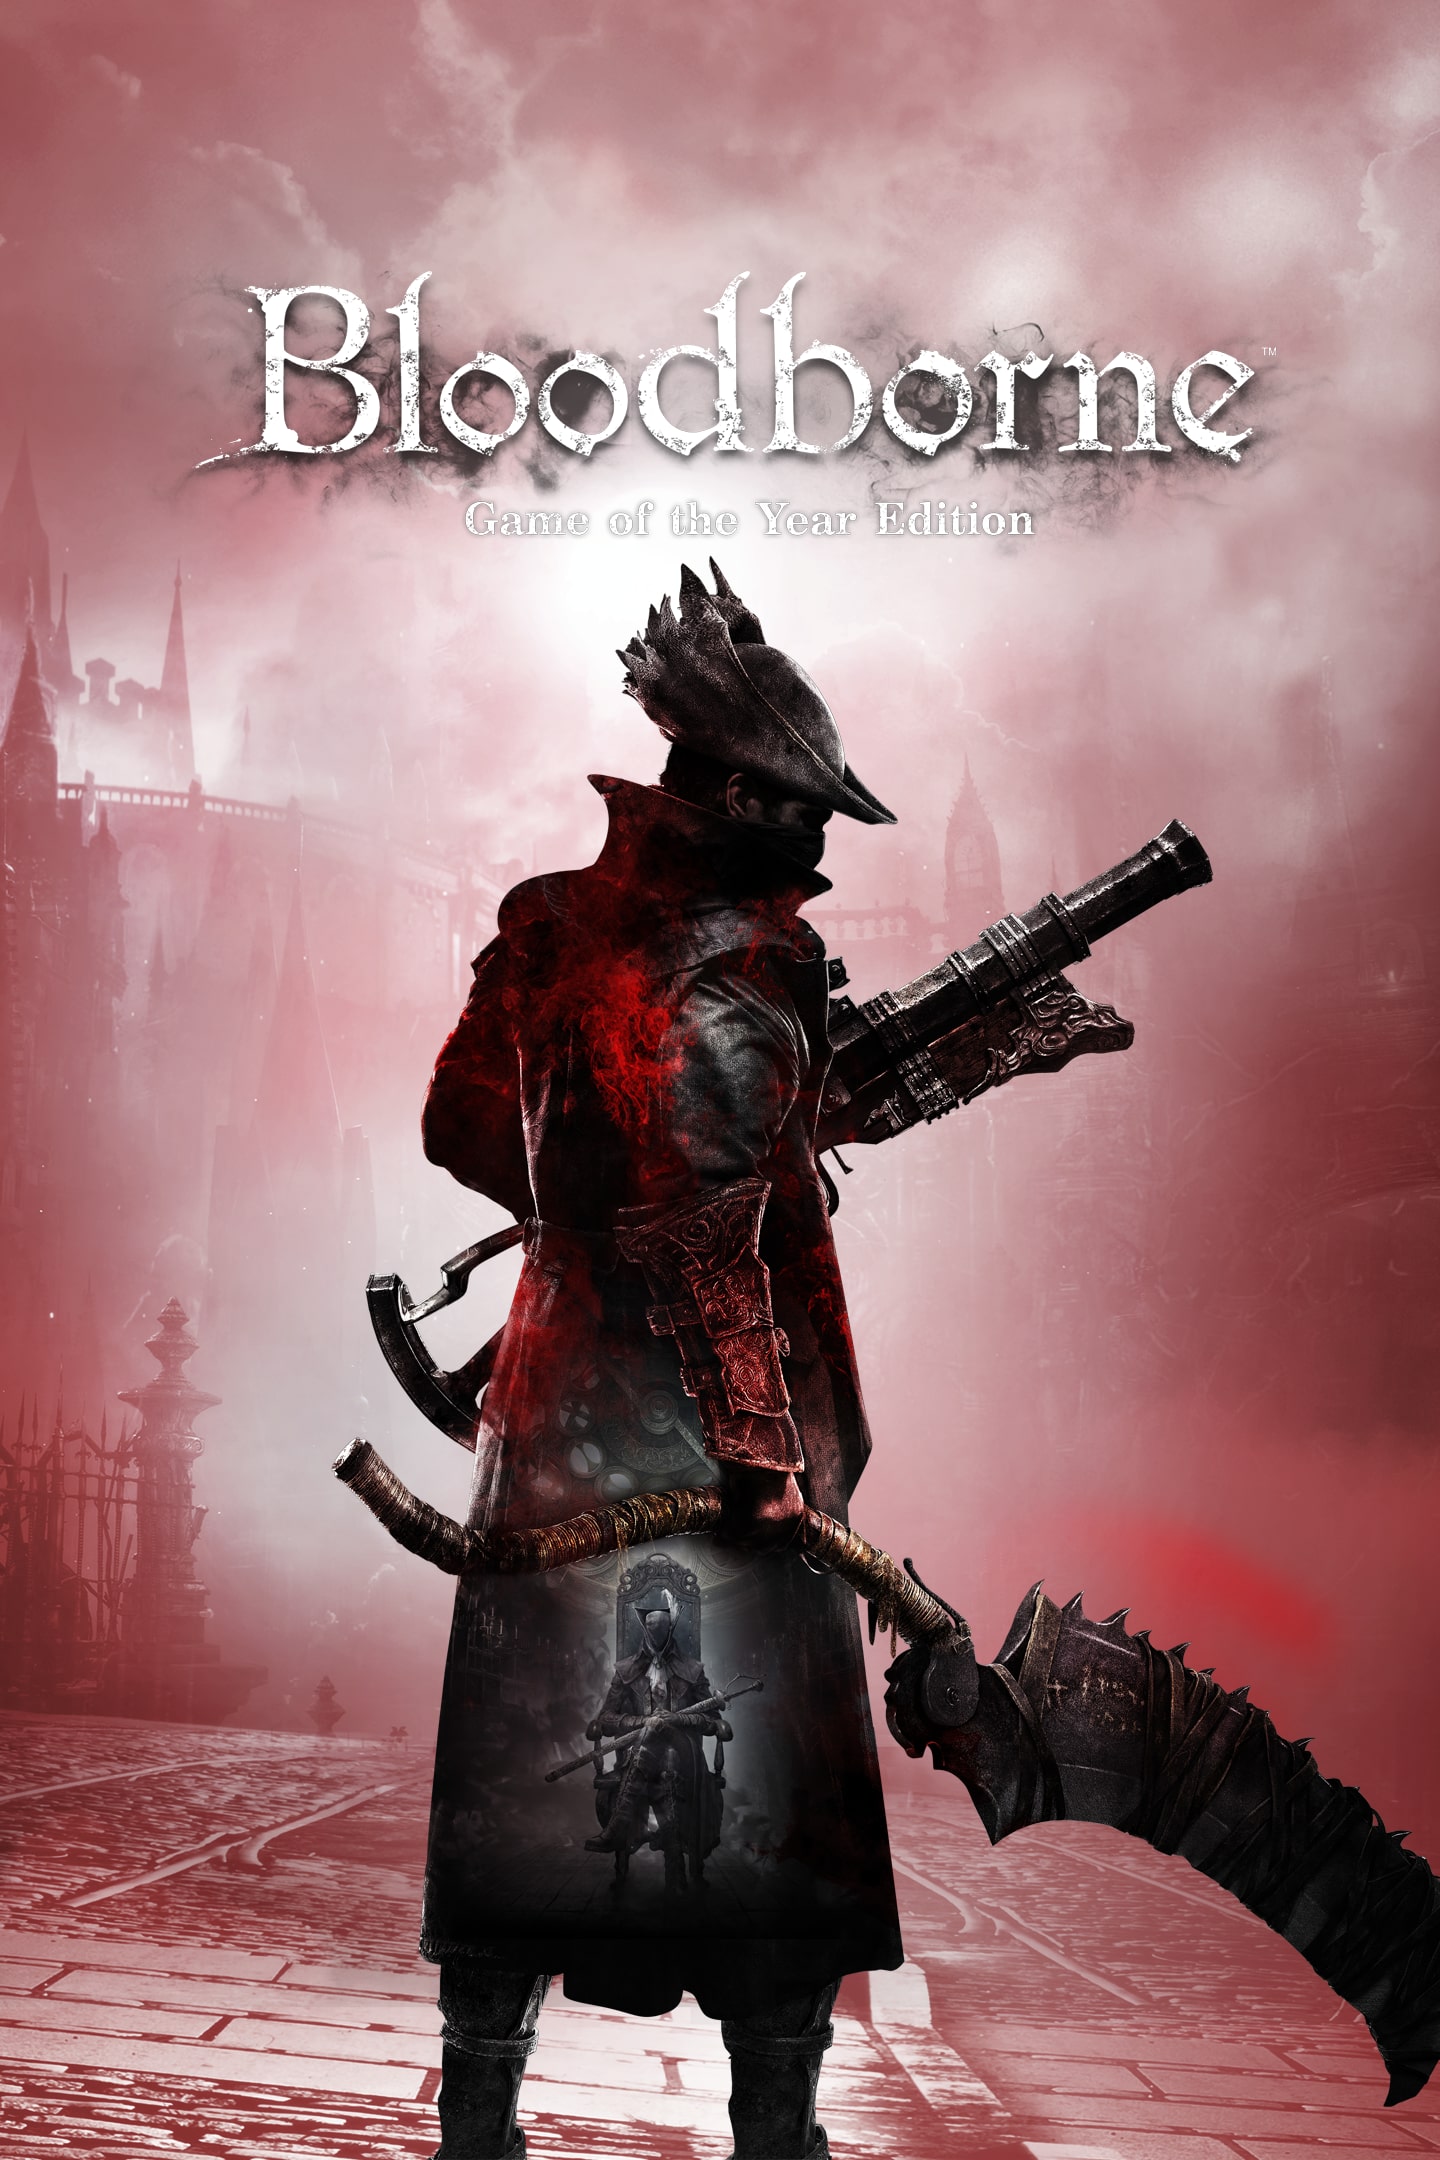 Bloodborne Game of the Year Edition Announced with Release Date - IGN